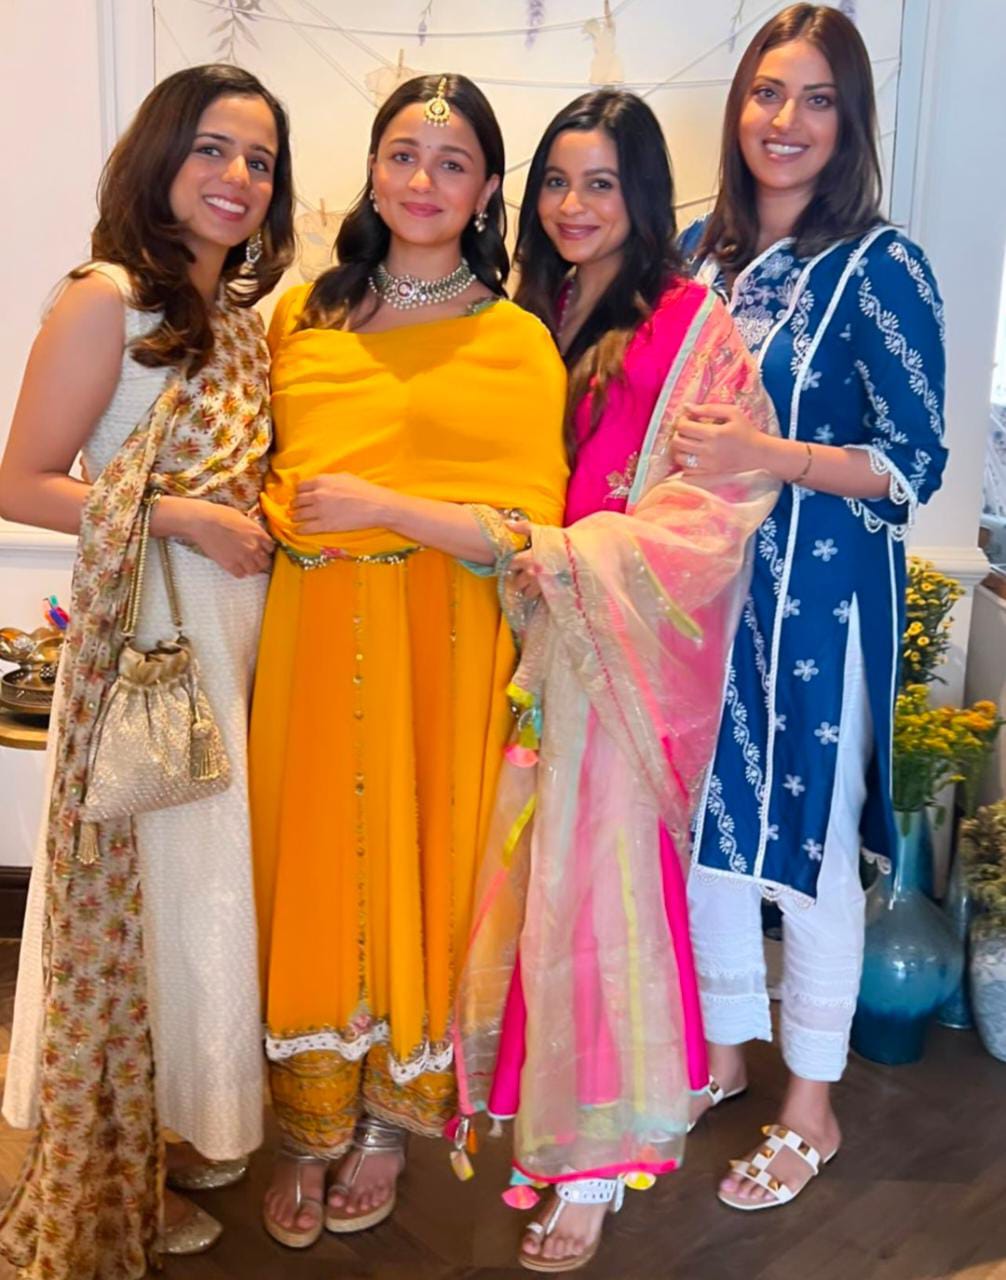 Alia Bhatt poses with her girl gang at baby shower